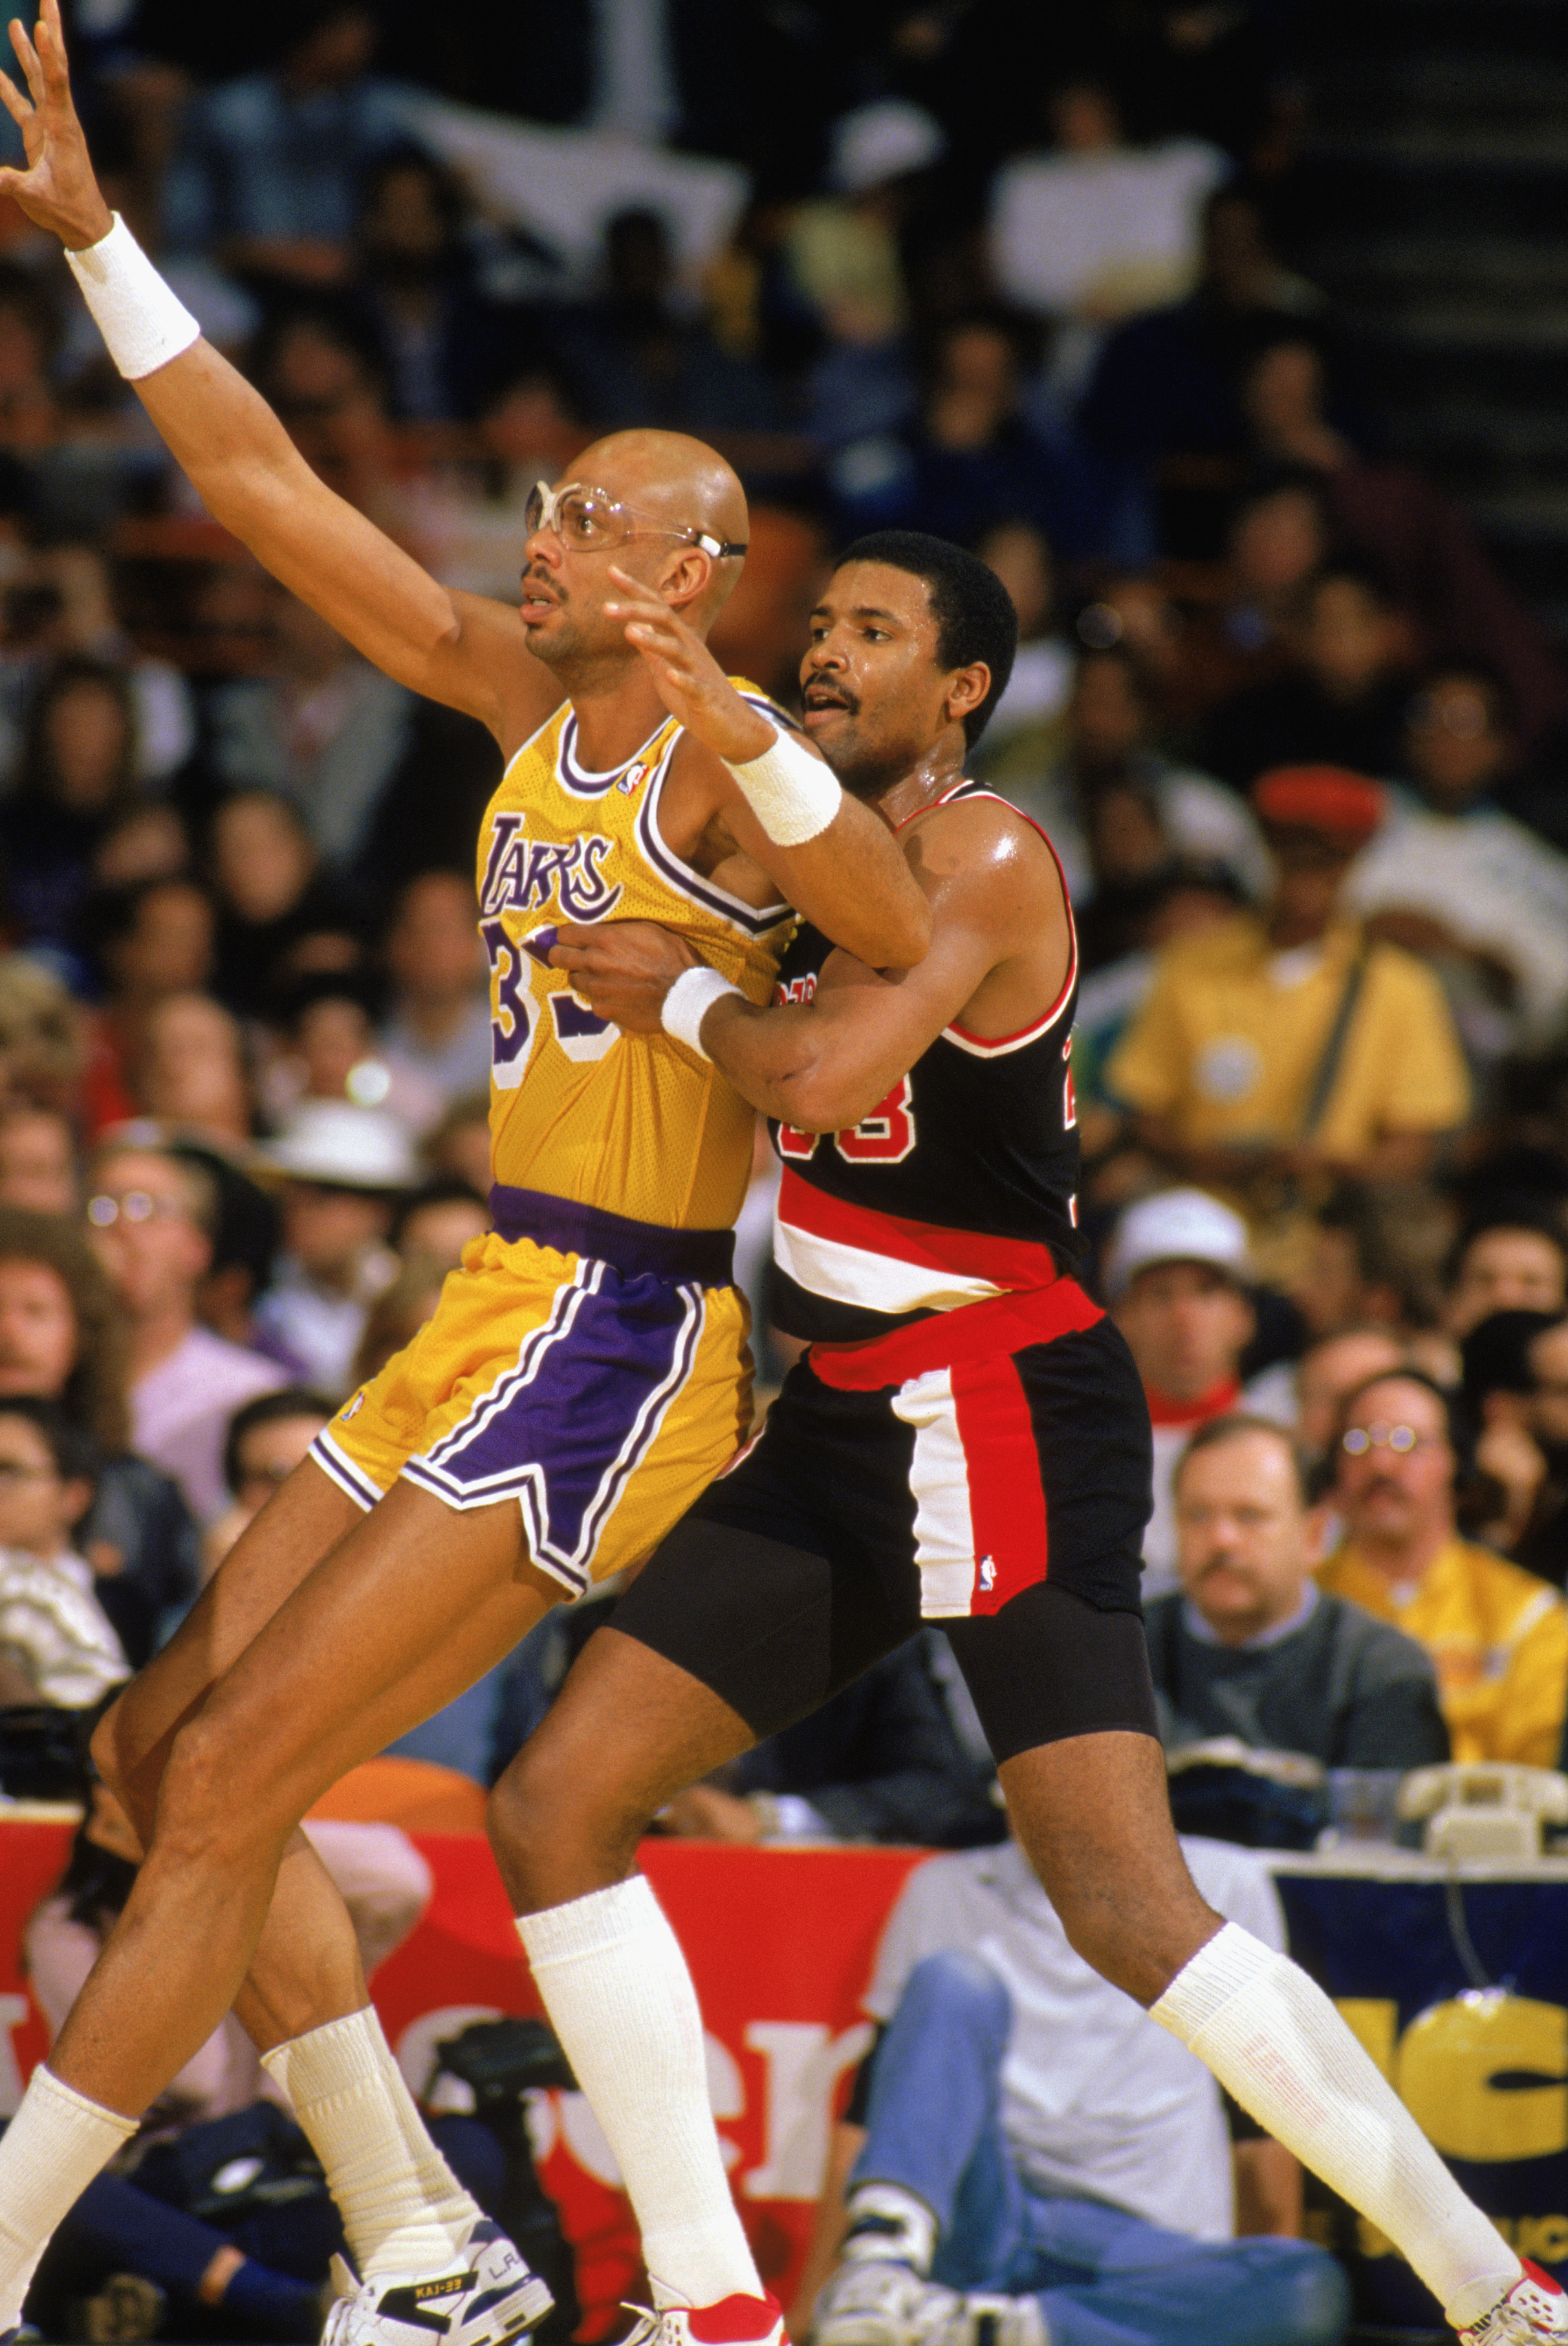 Abdul Jabbar hold the top spot and the NBA's greatest middle man.